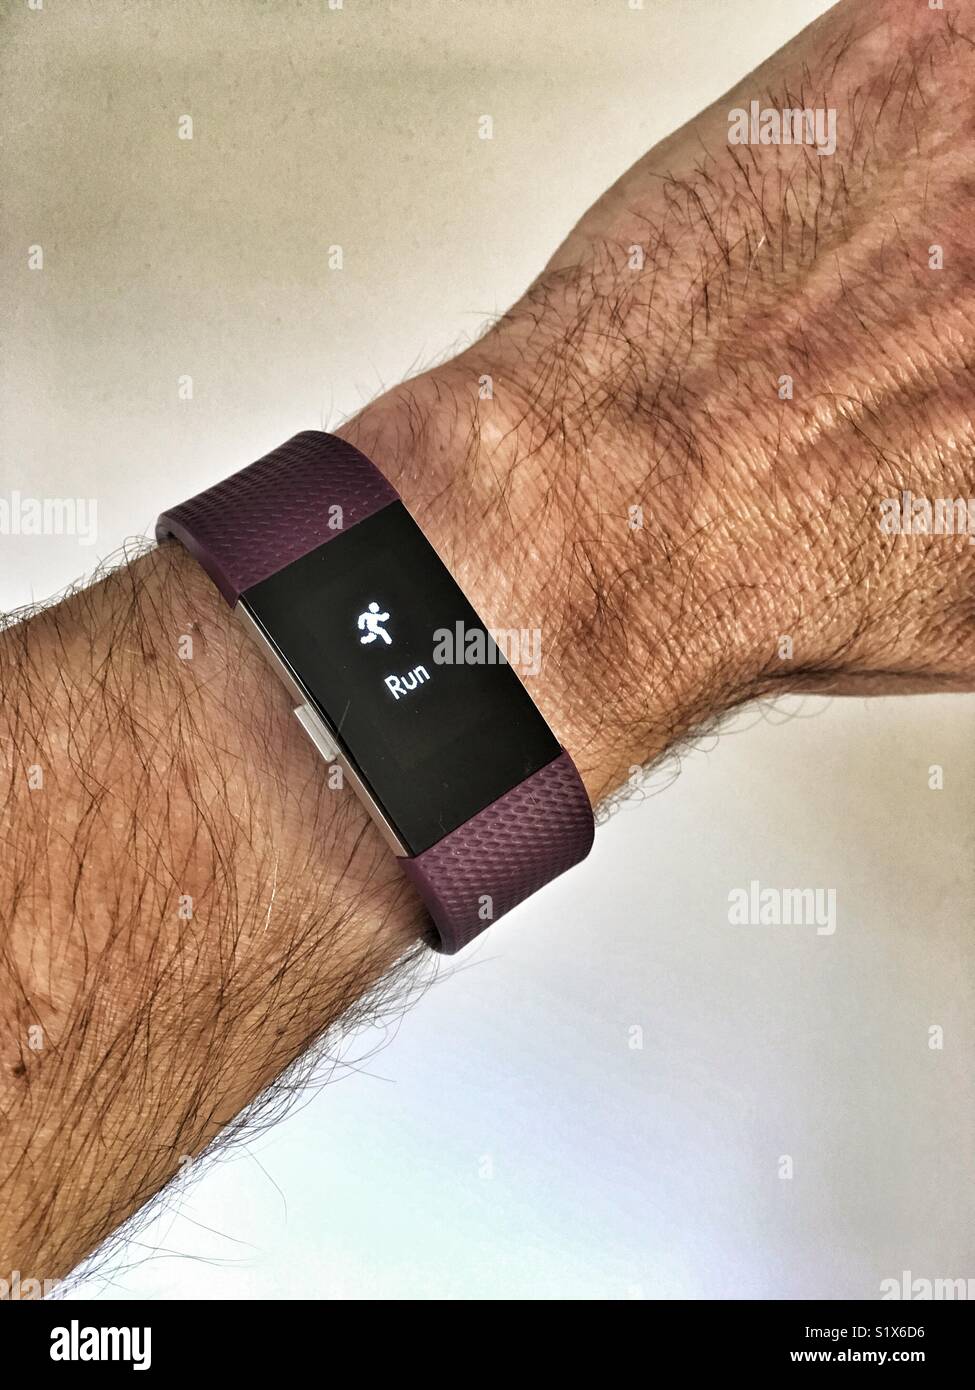 Fitbit set for a run Stock Photo